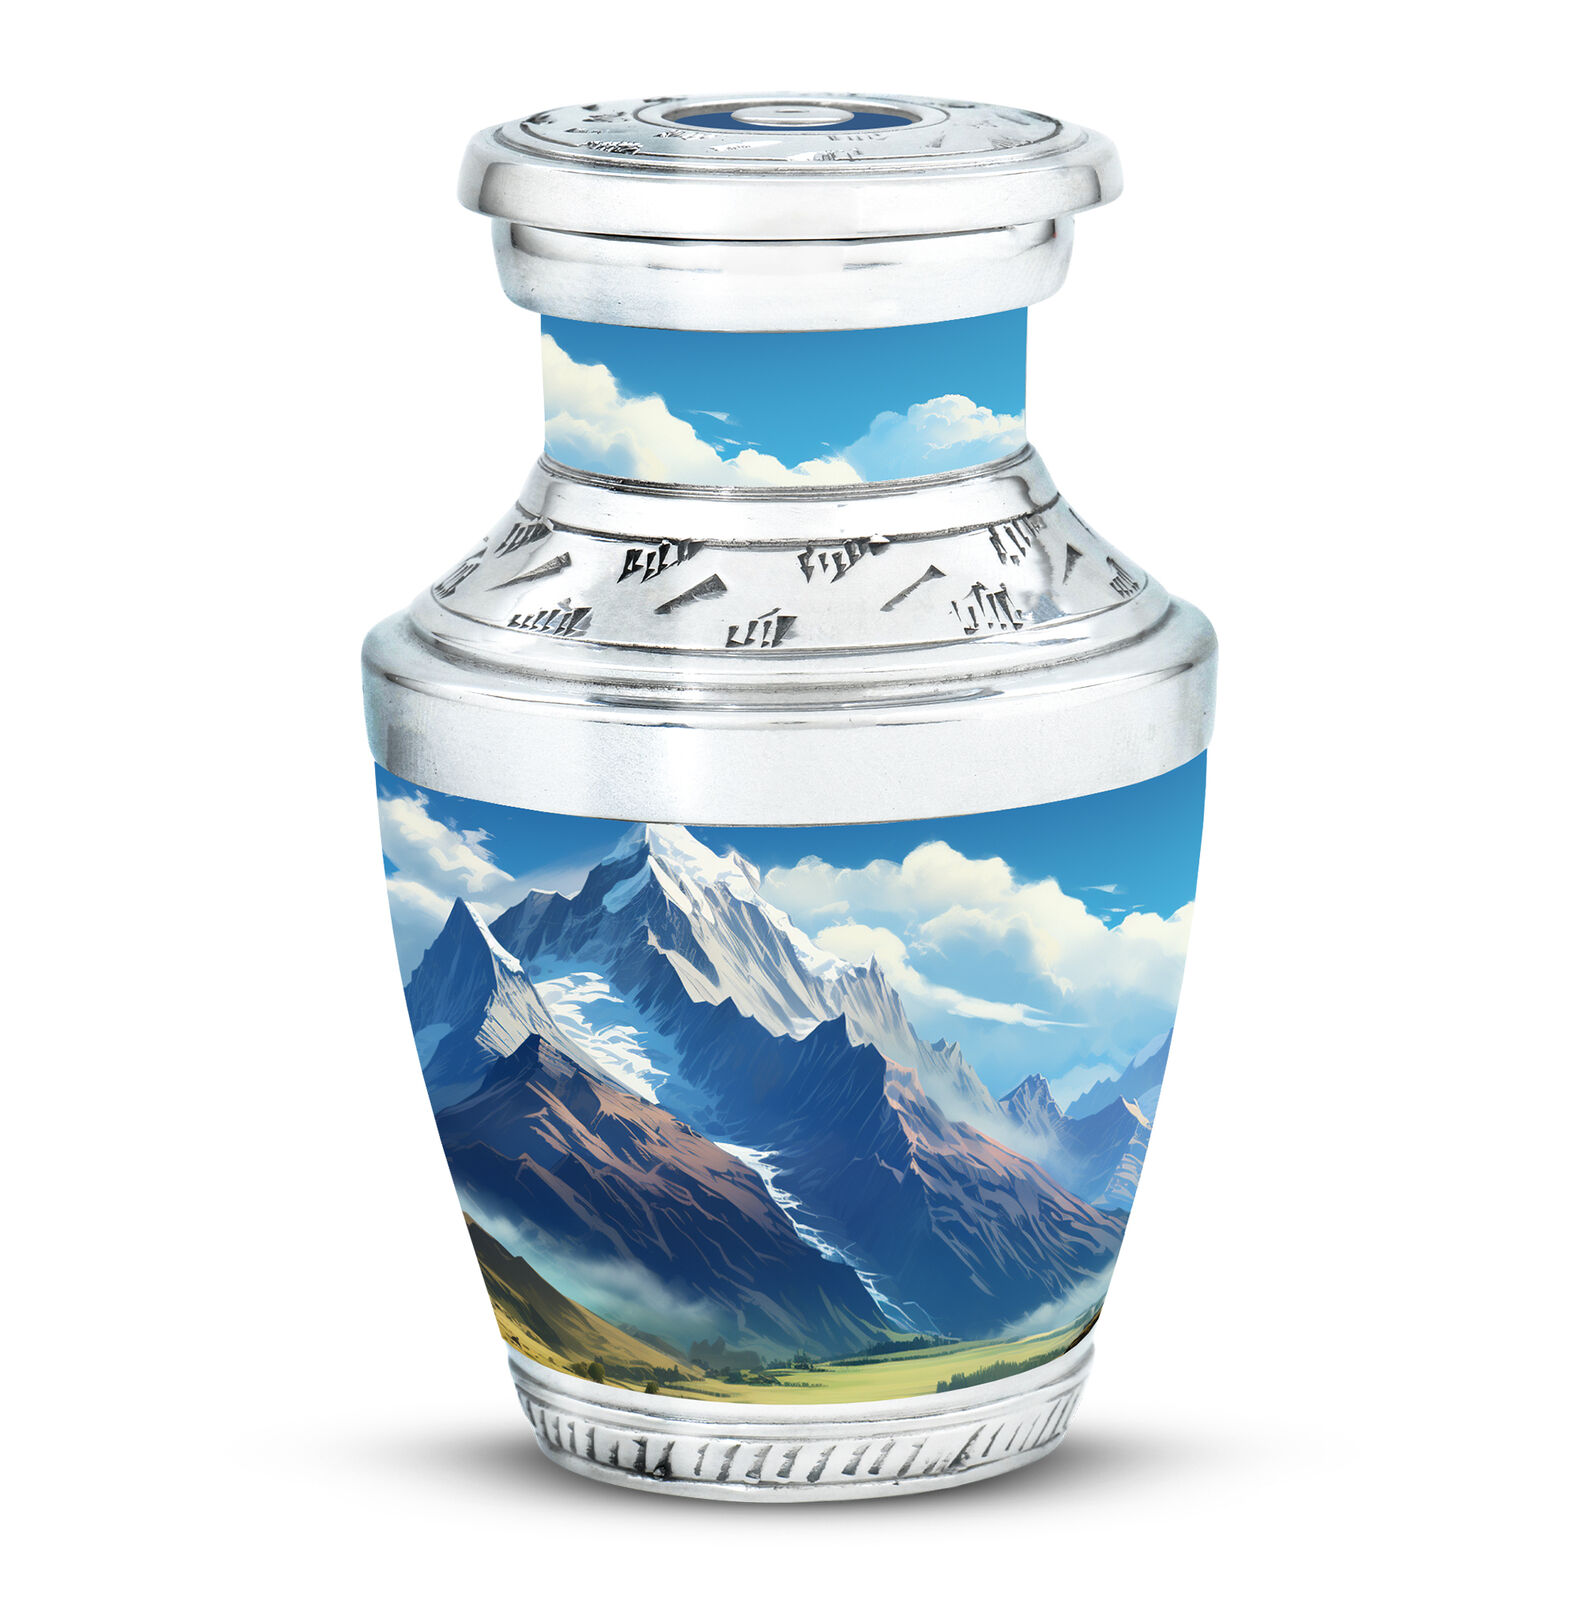 Decorative Urn For Human Ashes Sunny Alpine Meadows (3 Inch) Pack Of 1